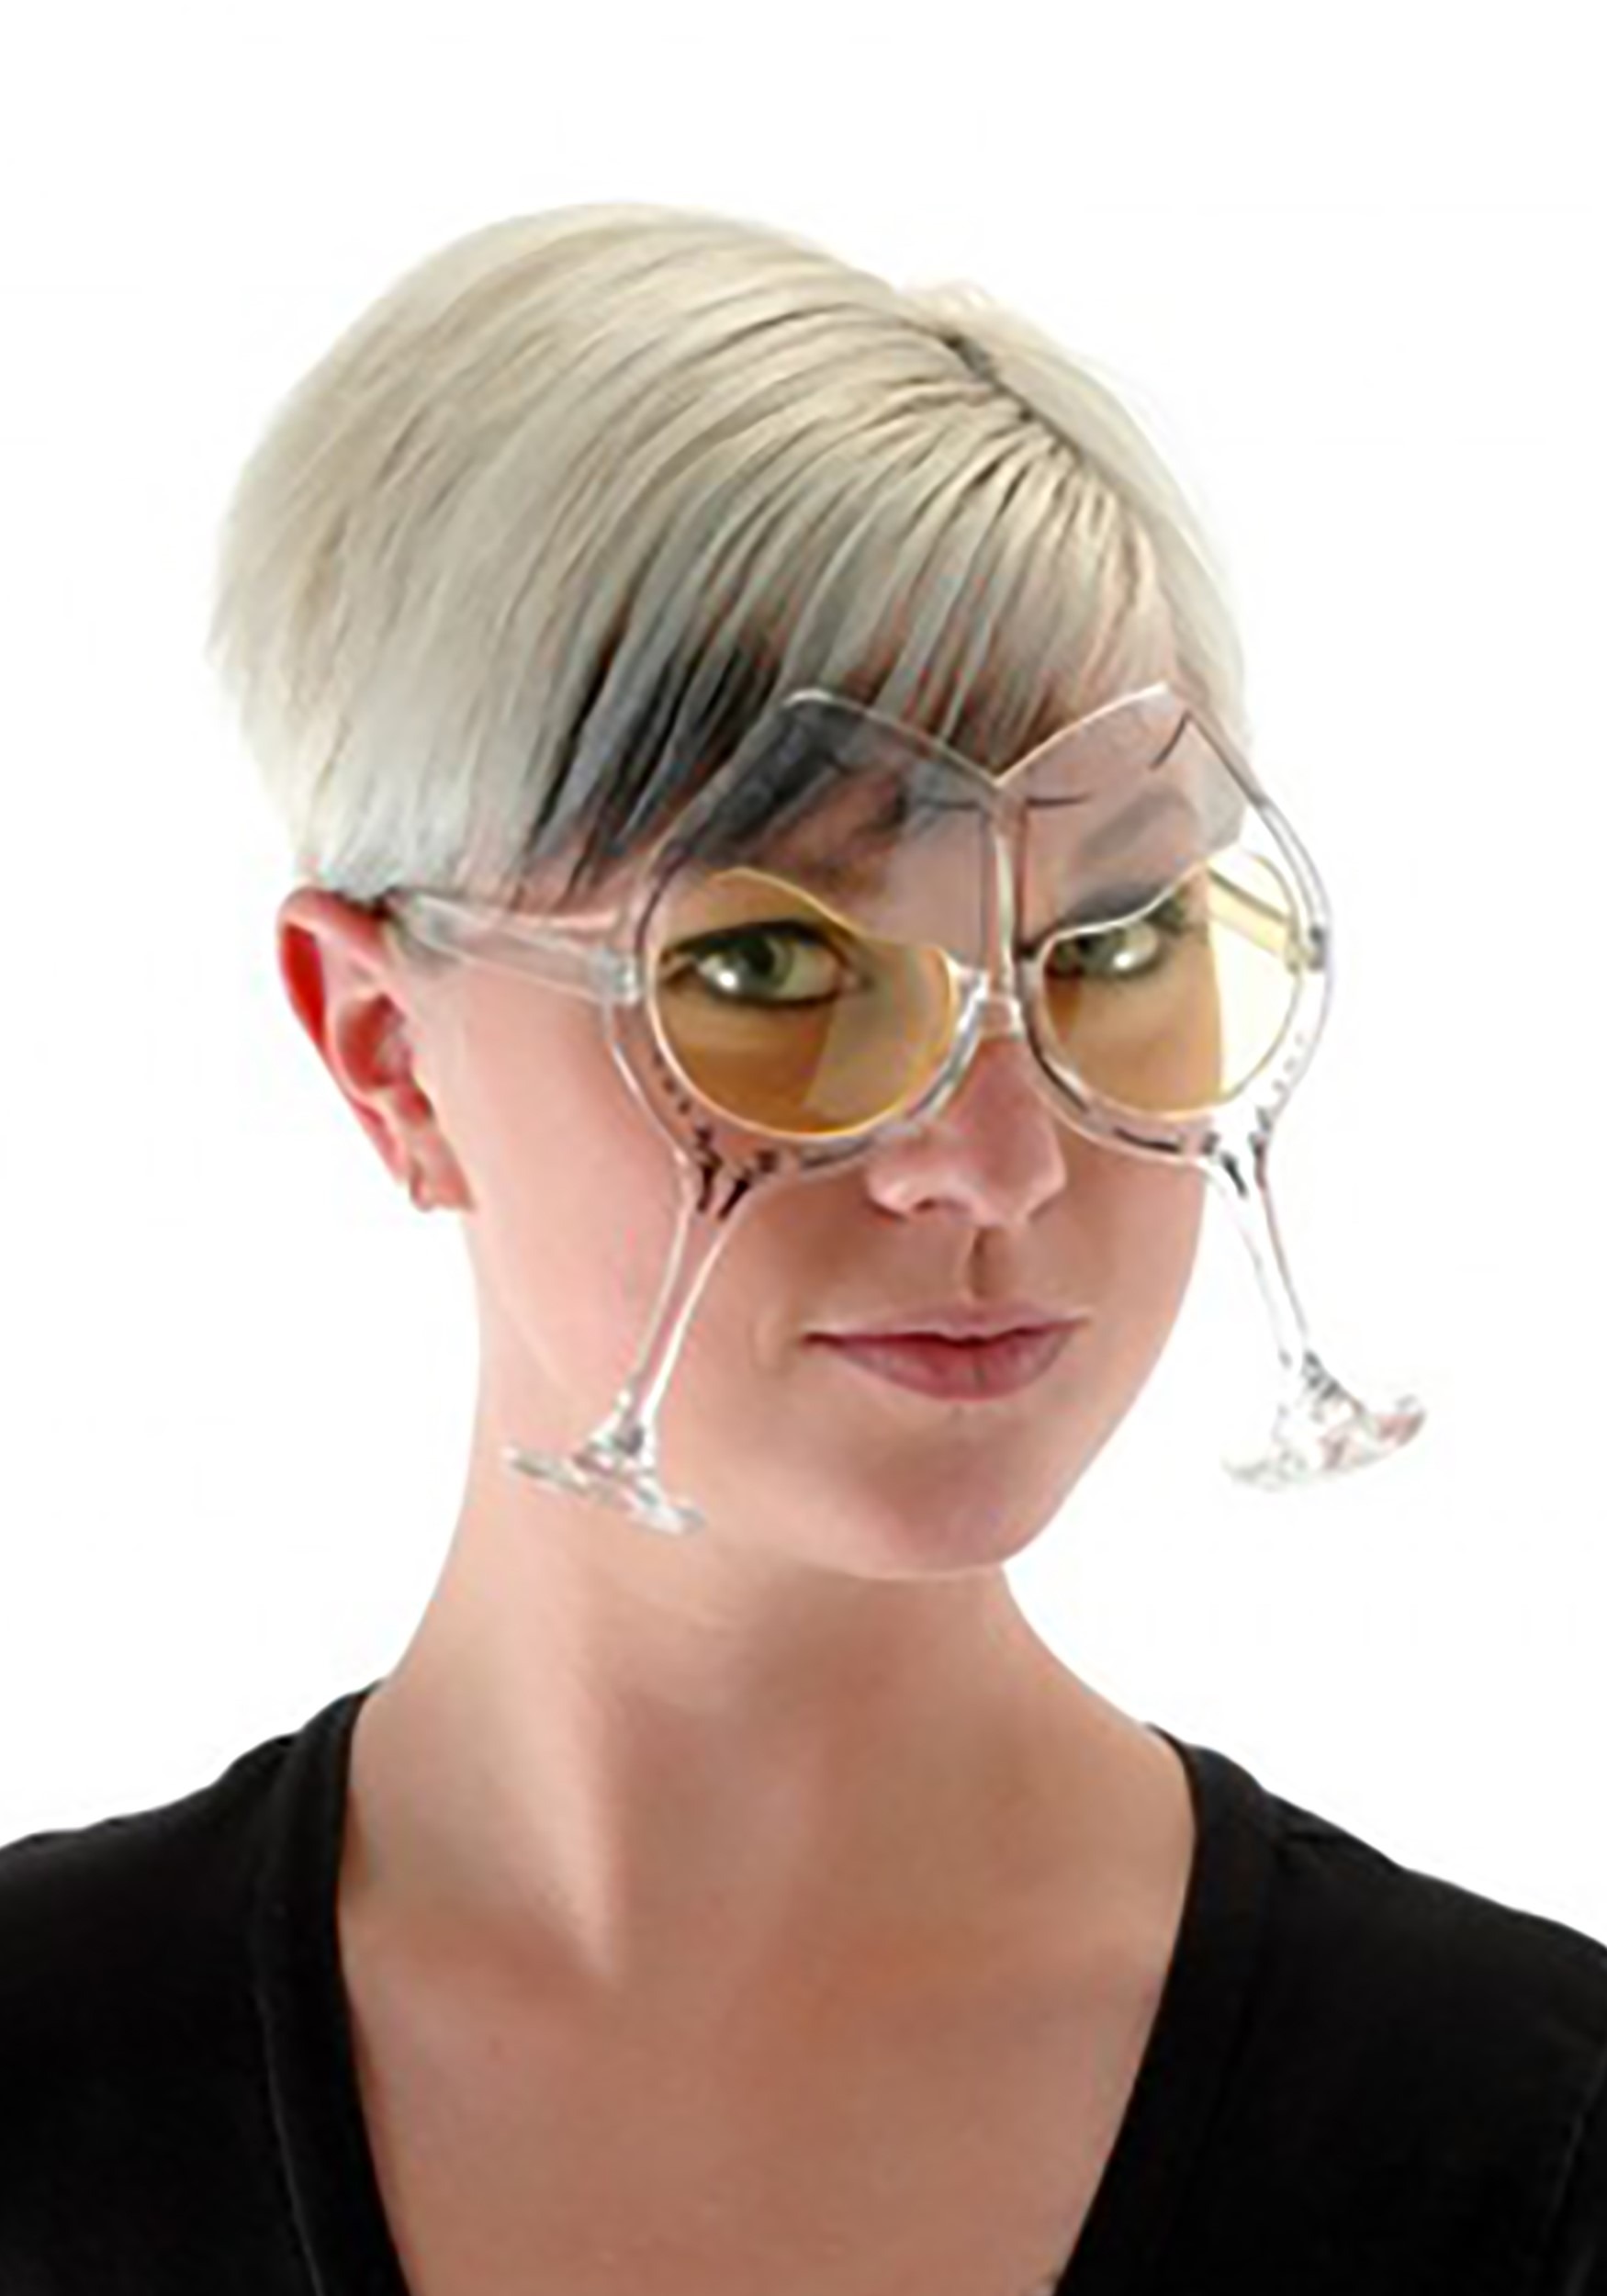 https://images.halloweencostumes.com/products/69181/1-1/wine-goblet-eyeglasses-clear-yellow.jpg